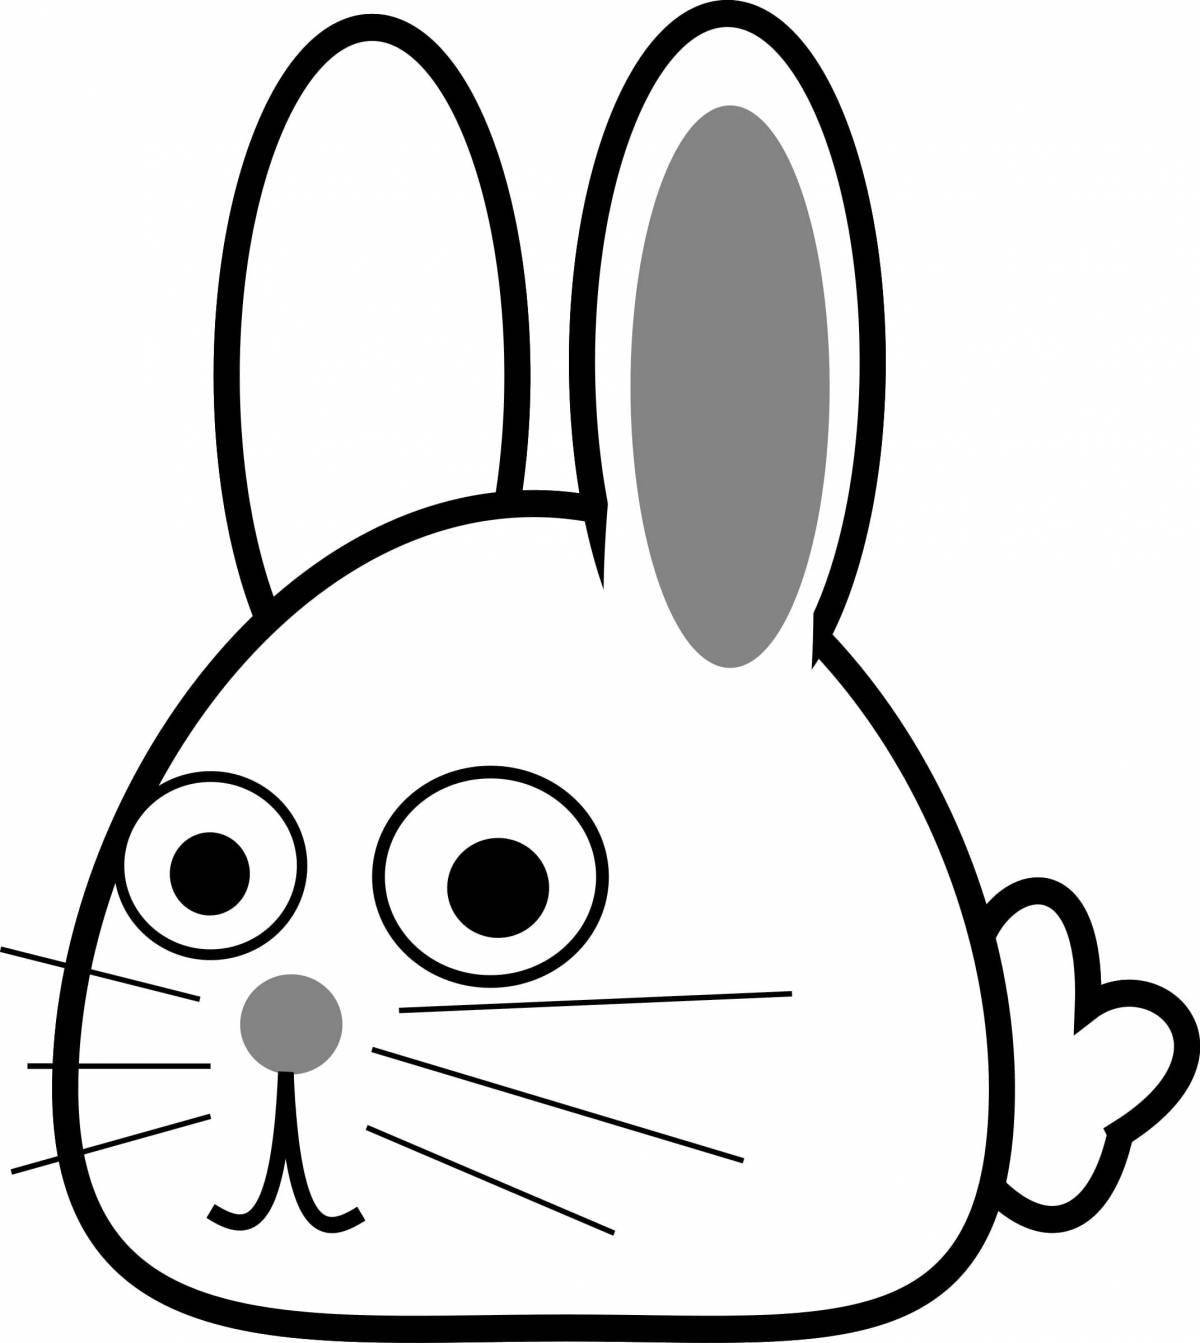 Coloring book cheerful hare rabbit